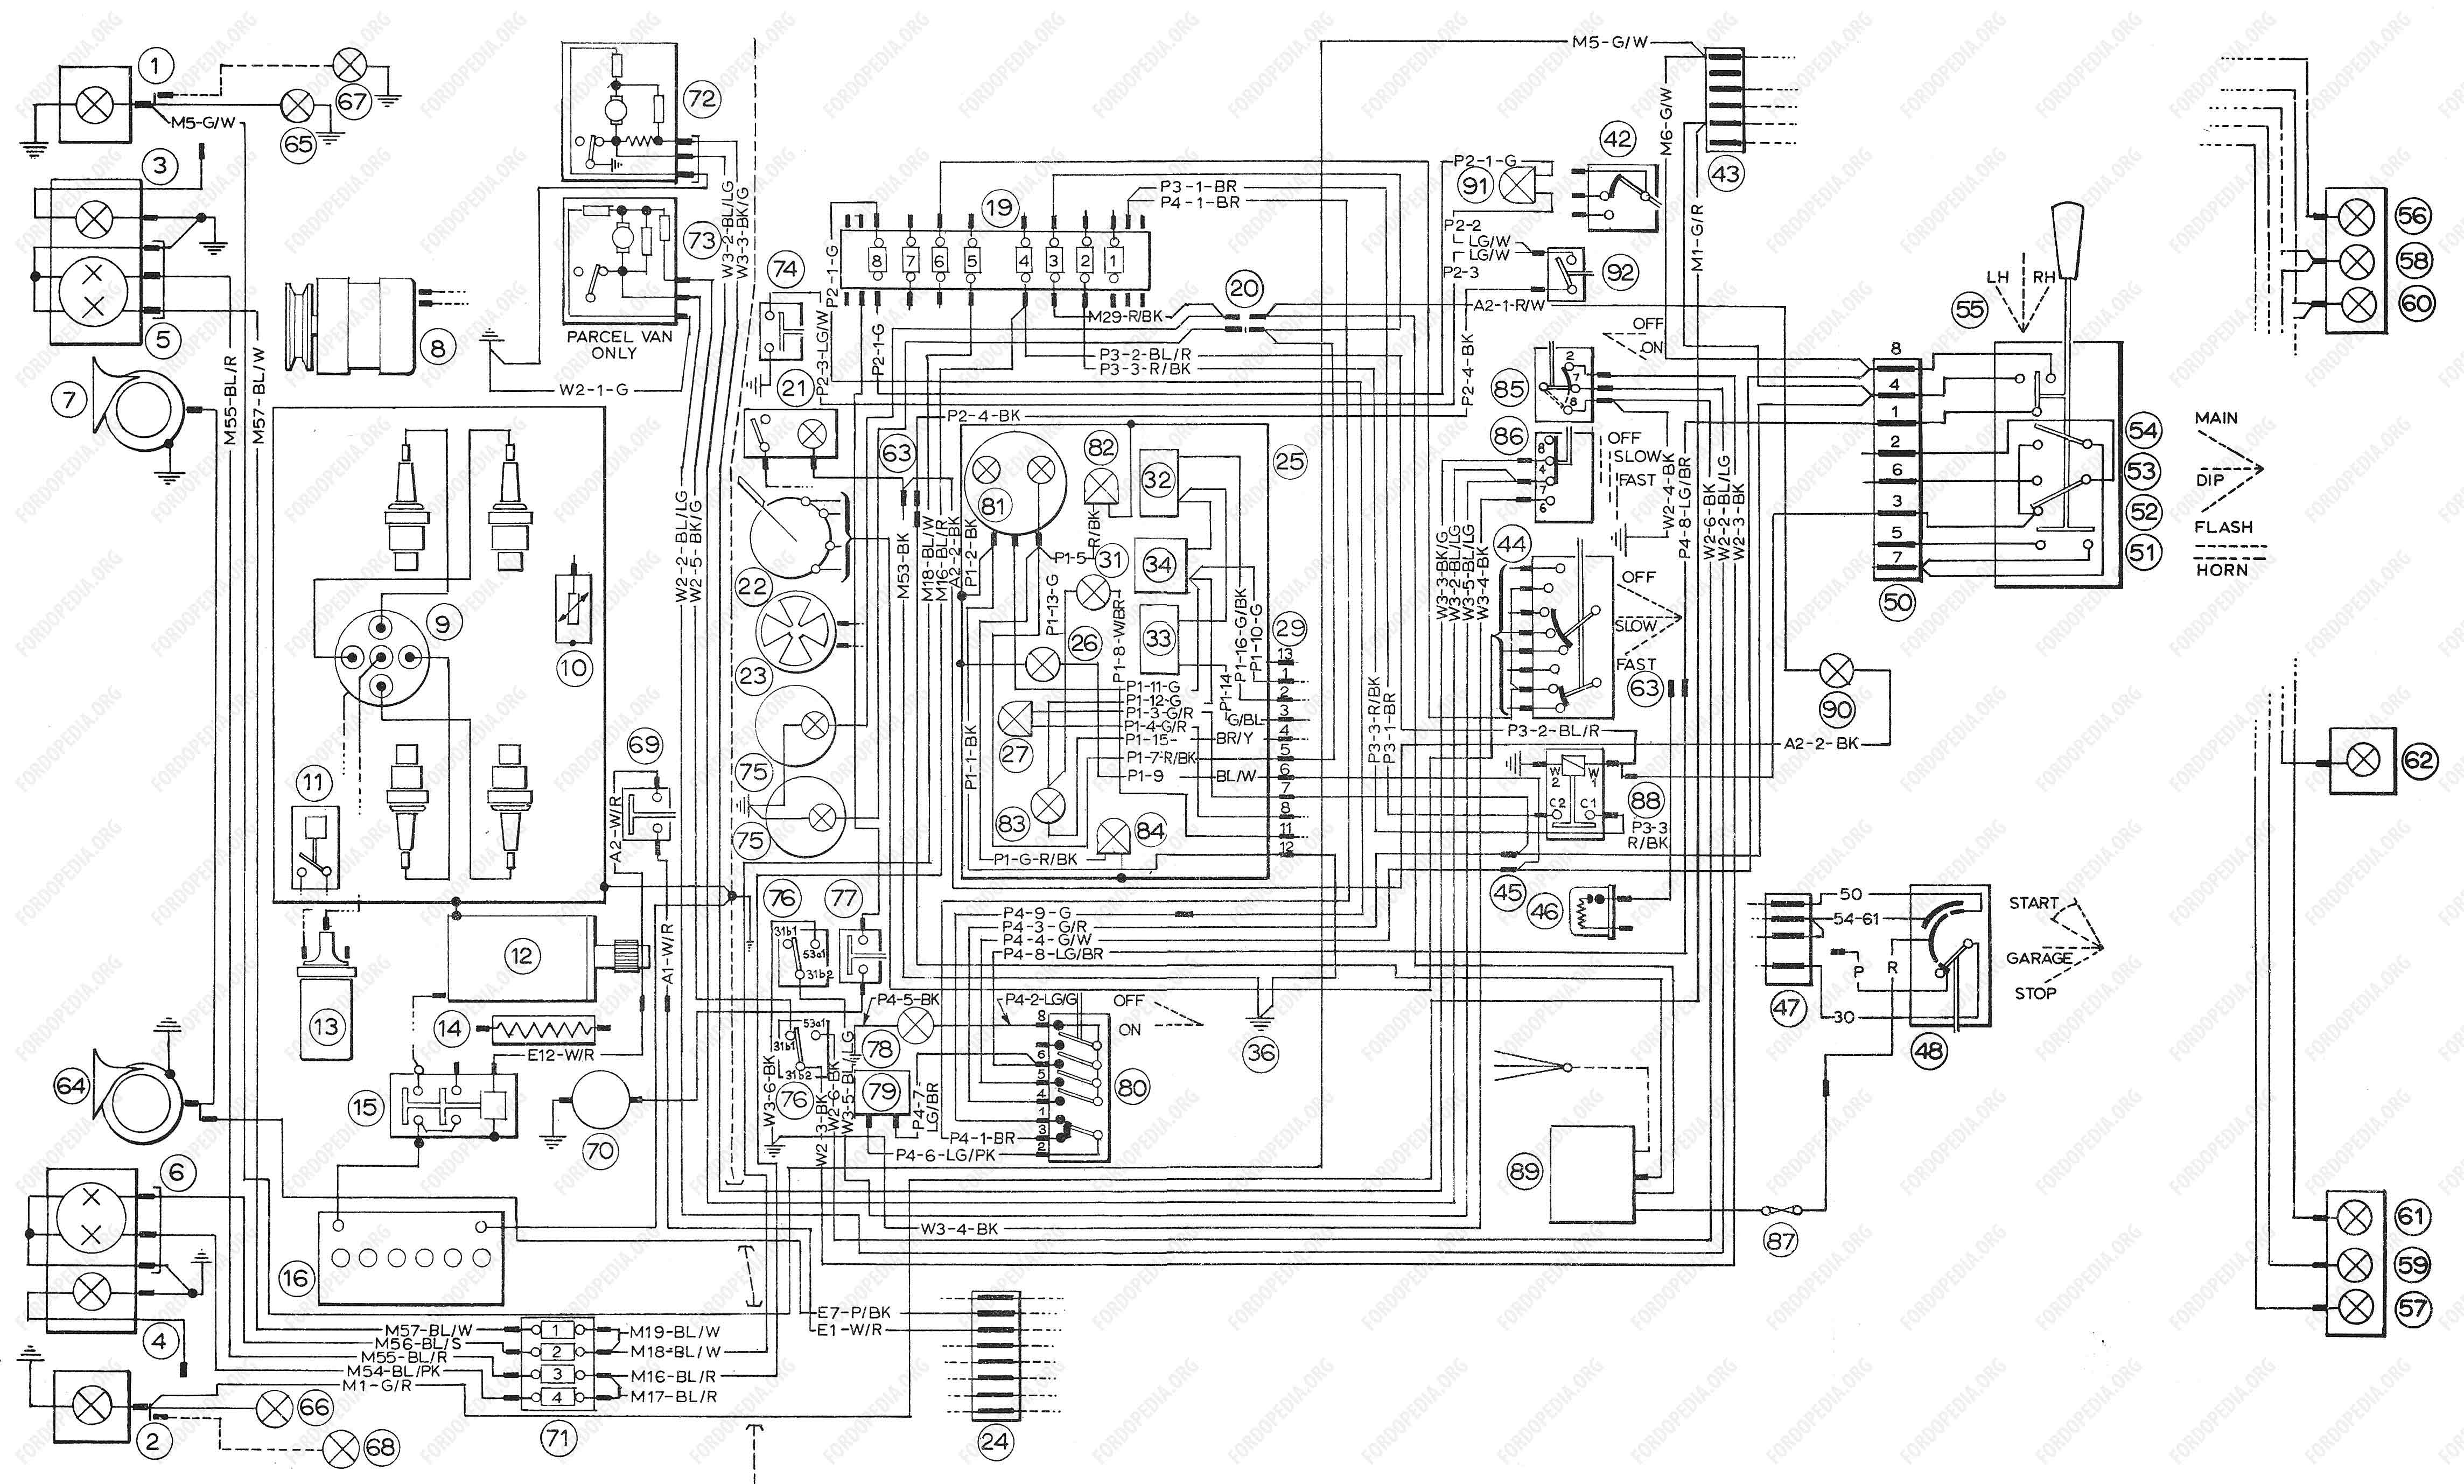 Ford Transit Wiring Diagram Download from www.fordopedia.org